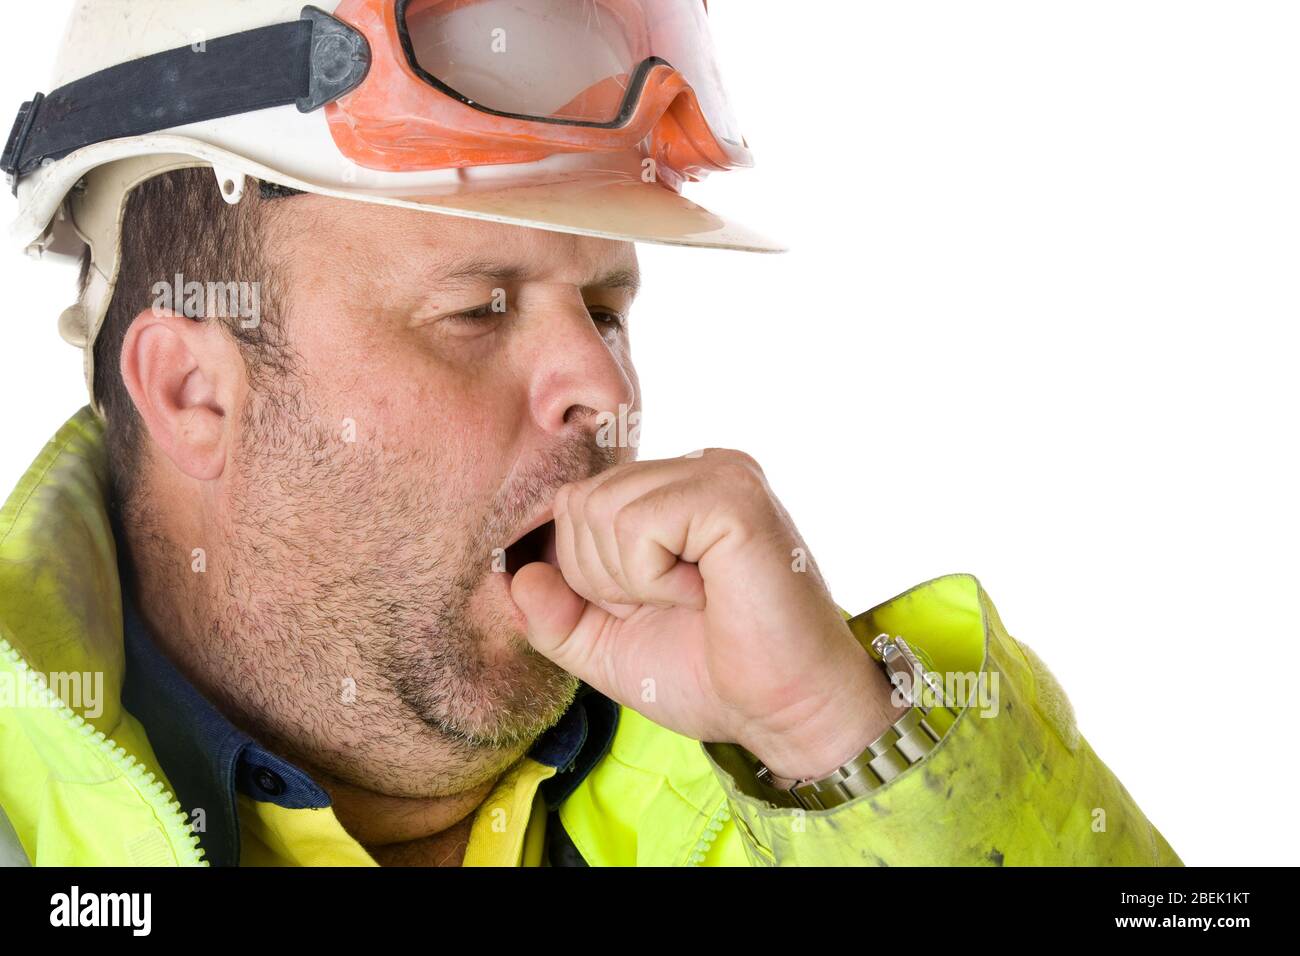 A worker yawning and covering his mouth. Stock Photo